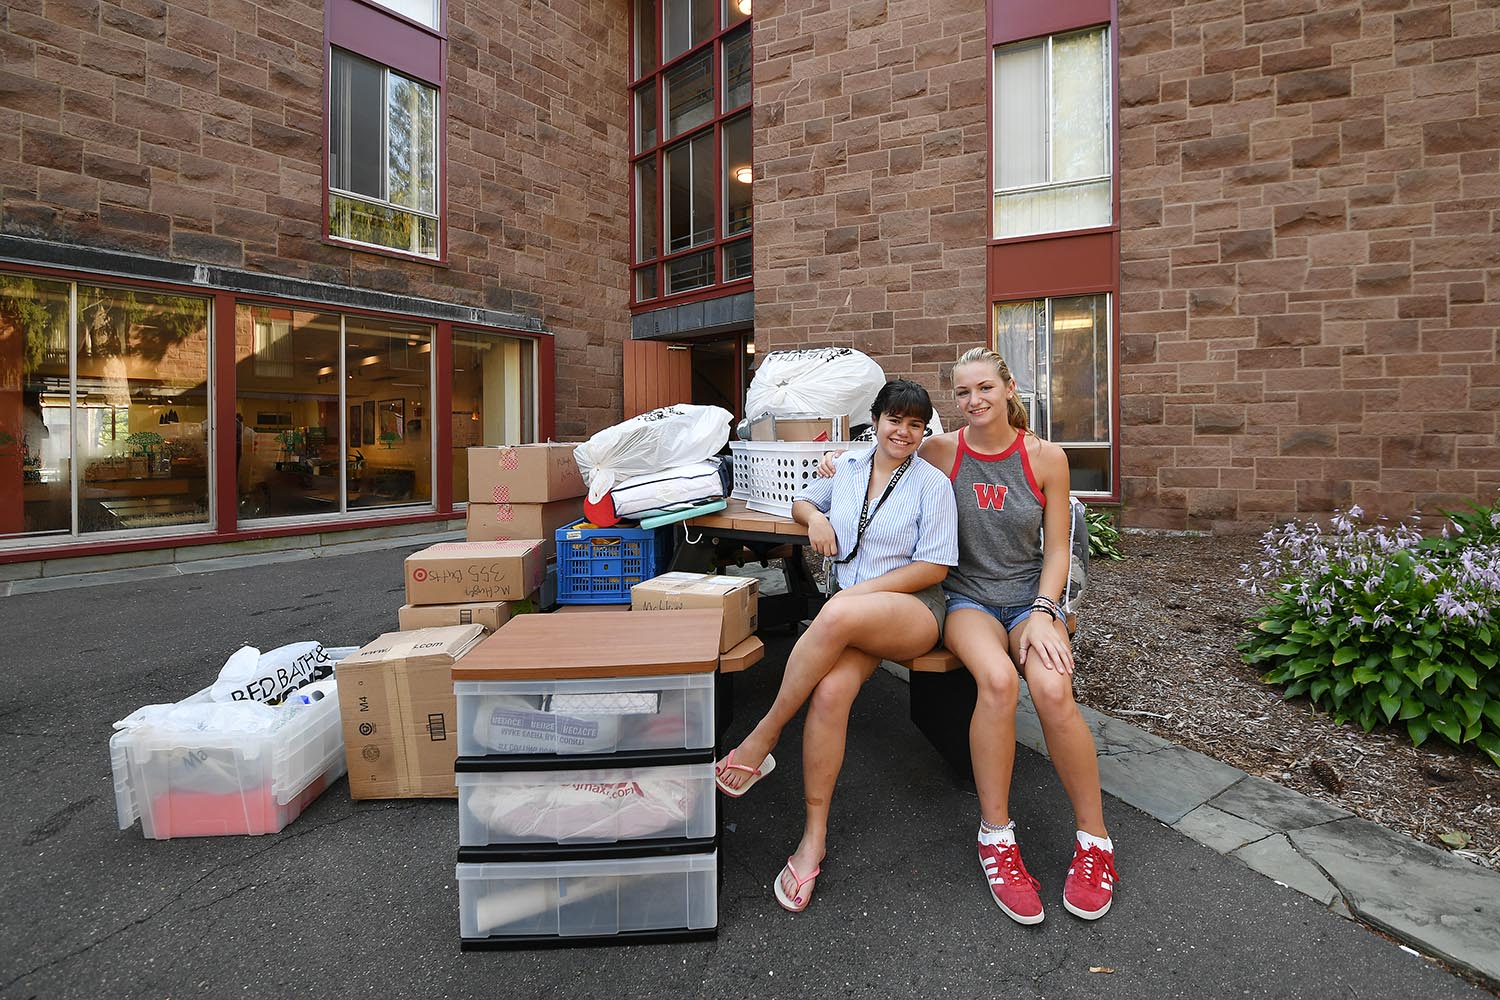 Annabella Machnizh ’22, from Mexico City, who arrived early for the International Students Orientation, helped her roommate, Amanda McHugh '22, of Westchester, N.Y,, on arrival day. The two chose to room together, citing similar living habits yet different social circles to make the transition both comfortable and interesting. Both were looking forward to explore a variety of different courses.